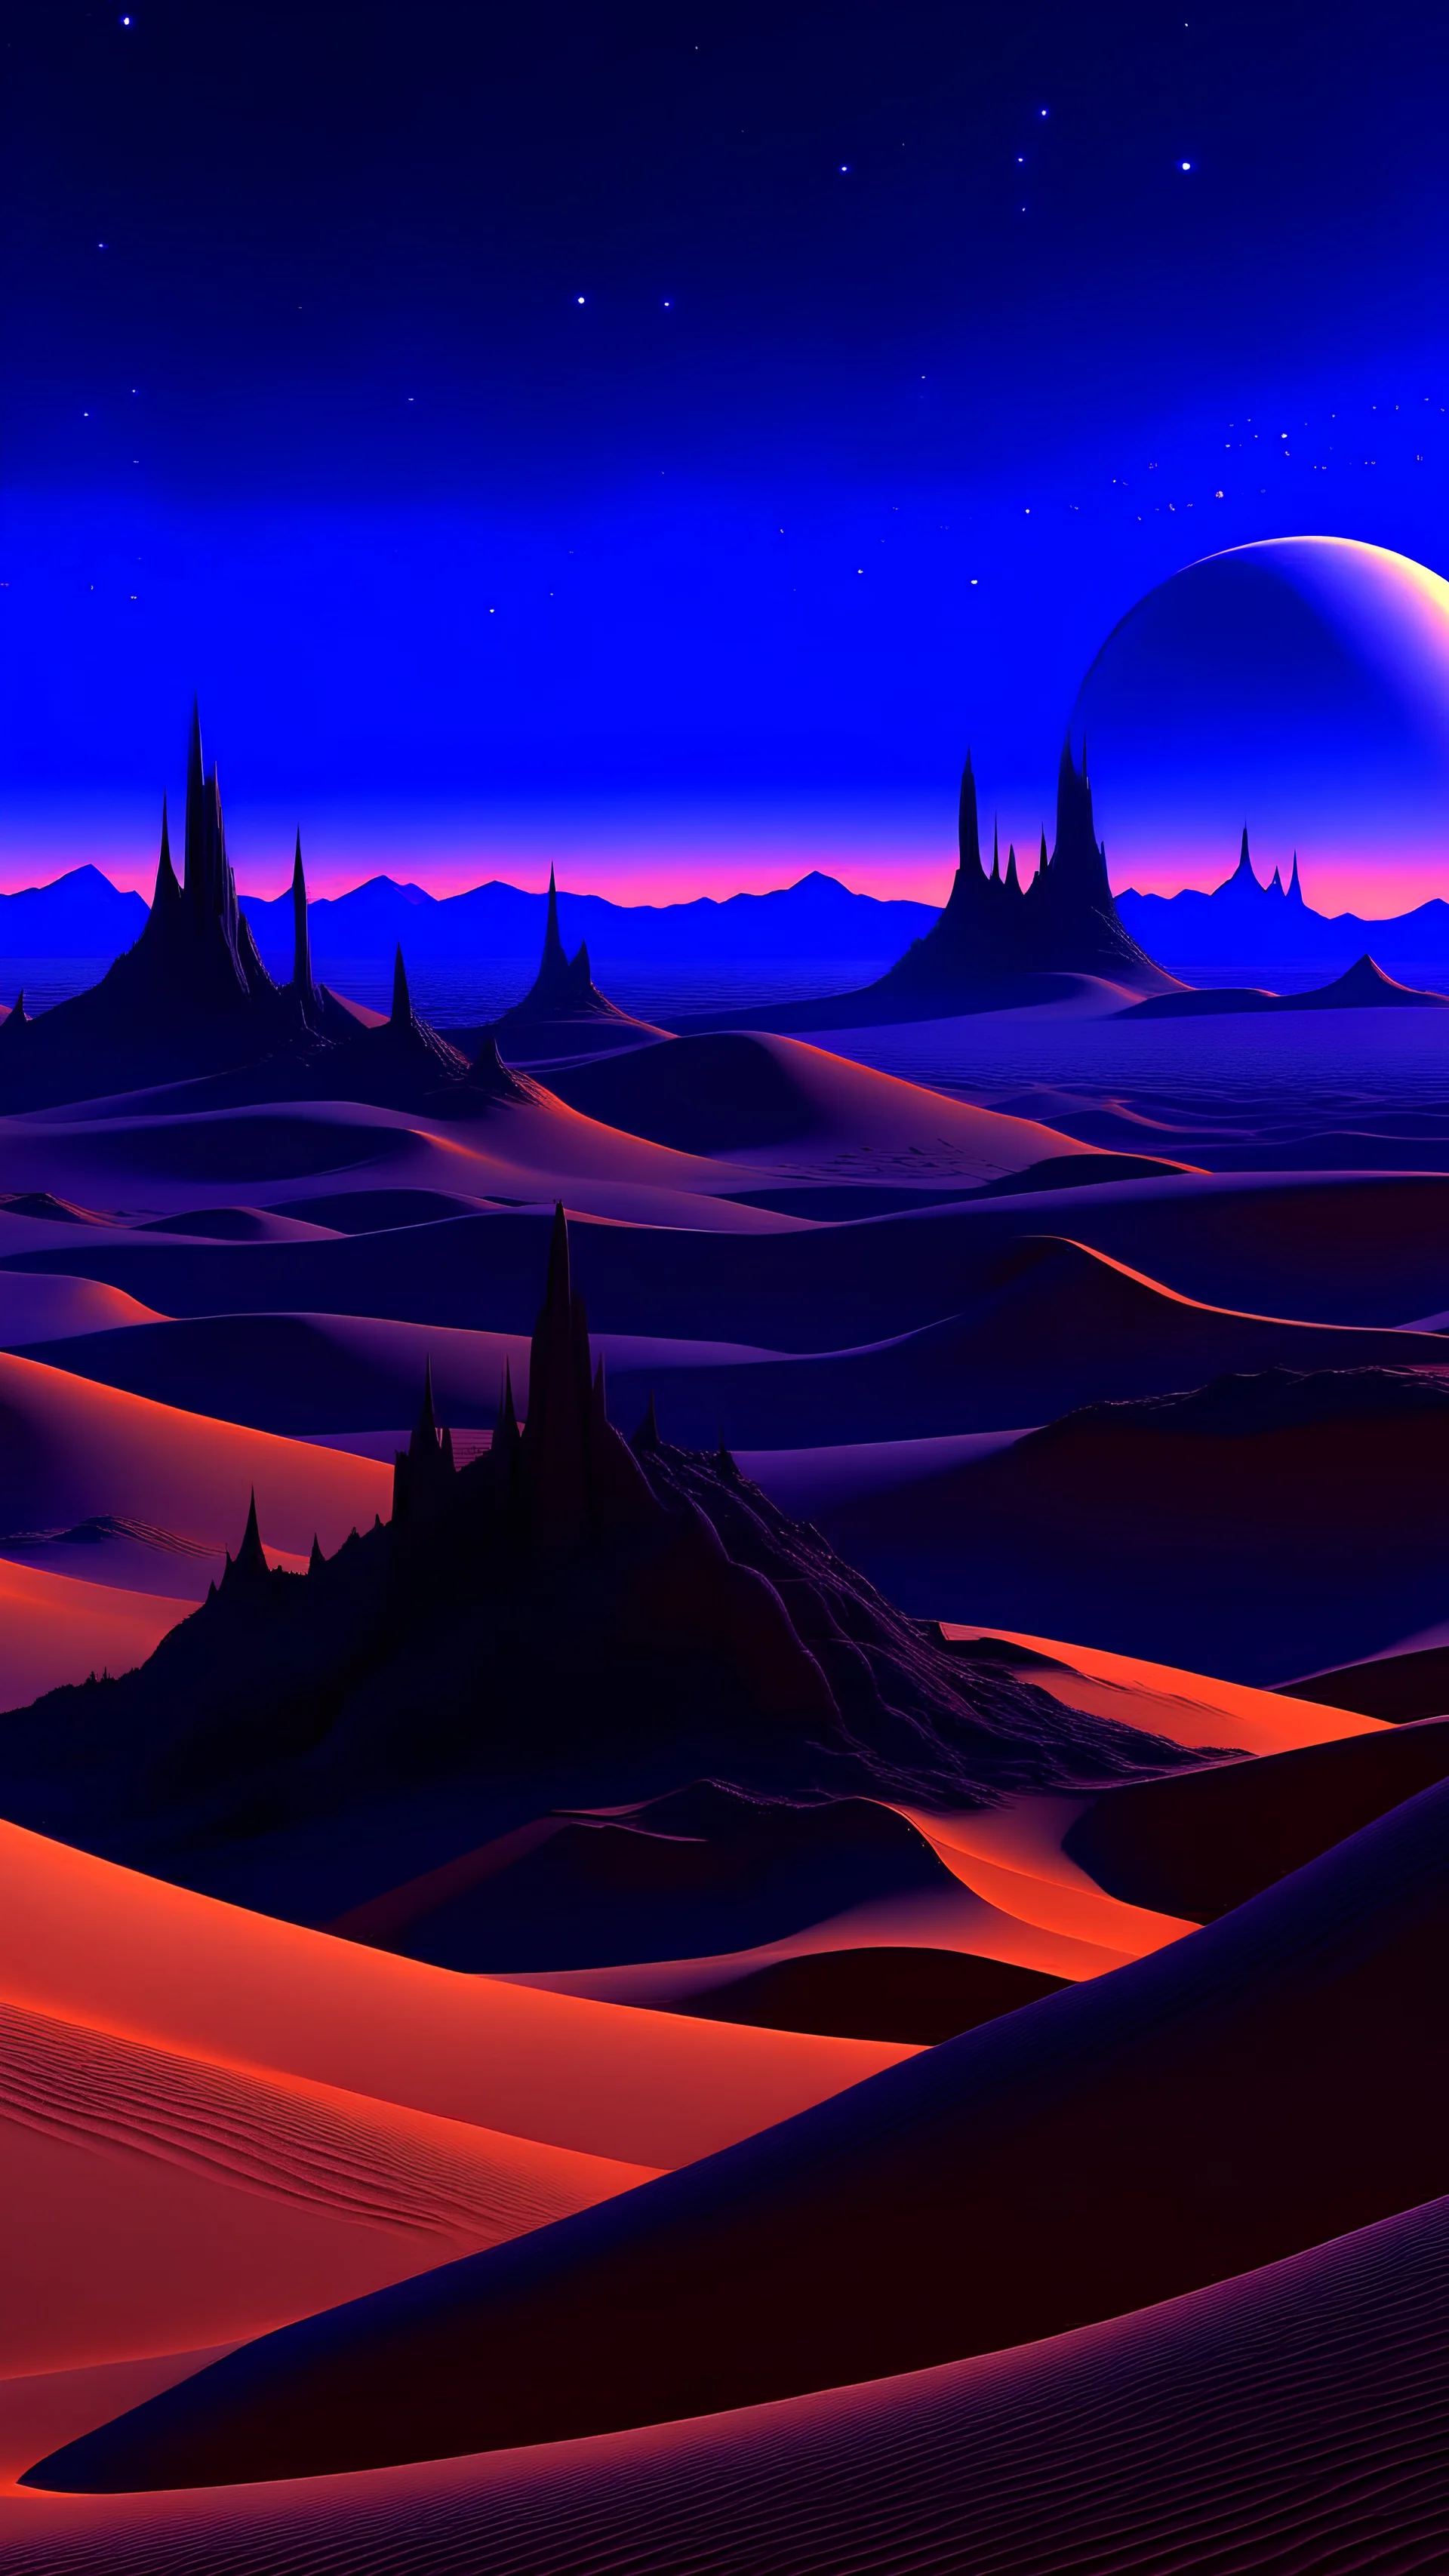 Create a vast desert landscape at twilight, with towering sand dunes that seem to go on forever. The sky is a deep, velvety purple, and three moons hang low, casting an eerie, otherworldly glow. Hidden among the dunes, a hidden city lies half-buried, its spires and arches hinting at an ancient, long-forgotten civilization.